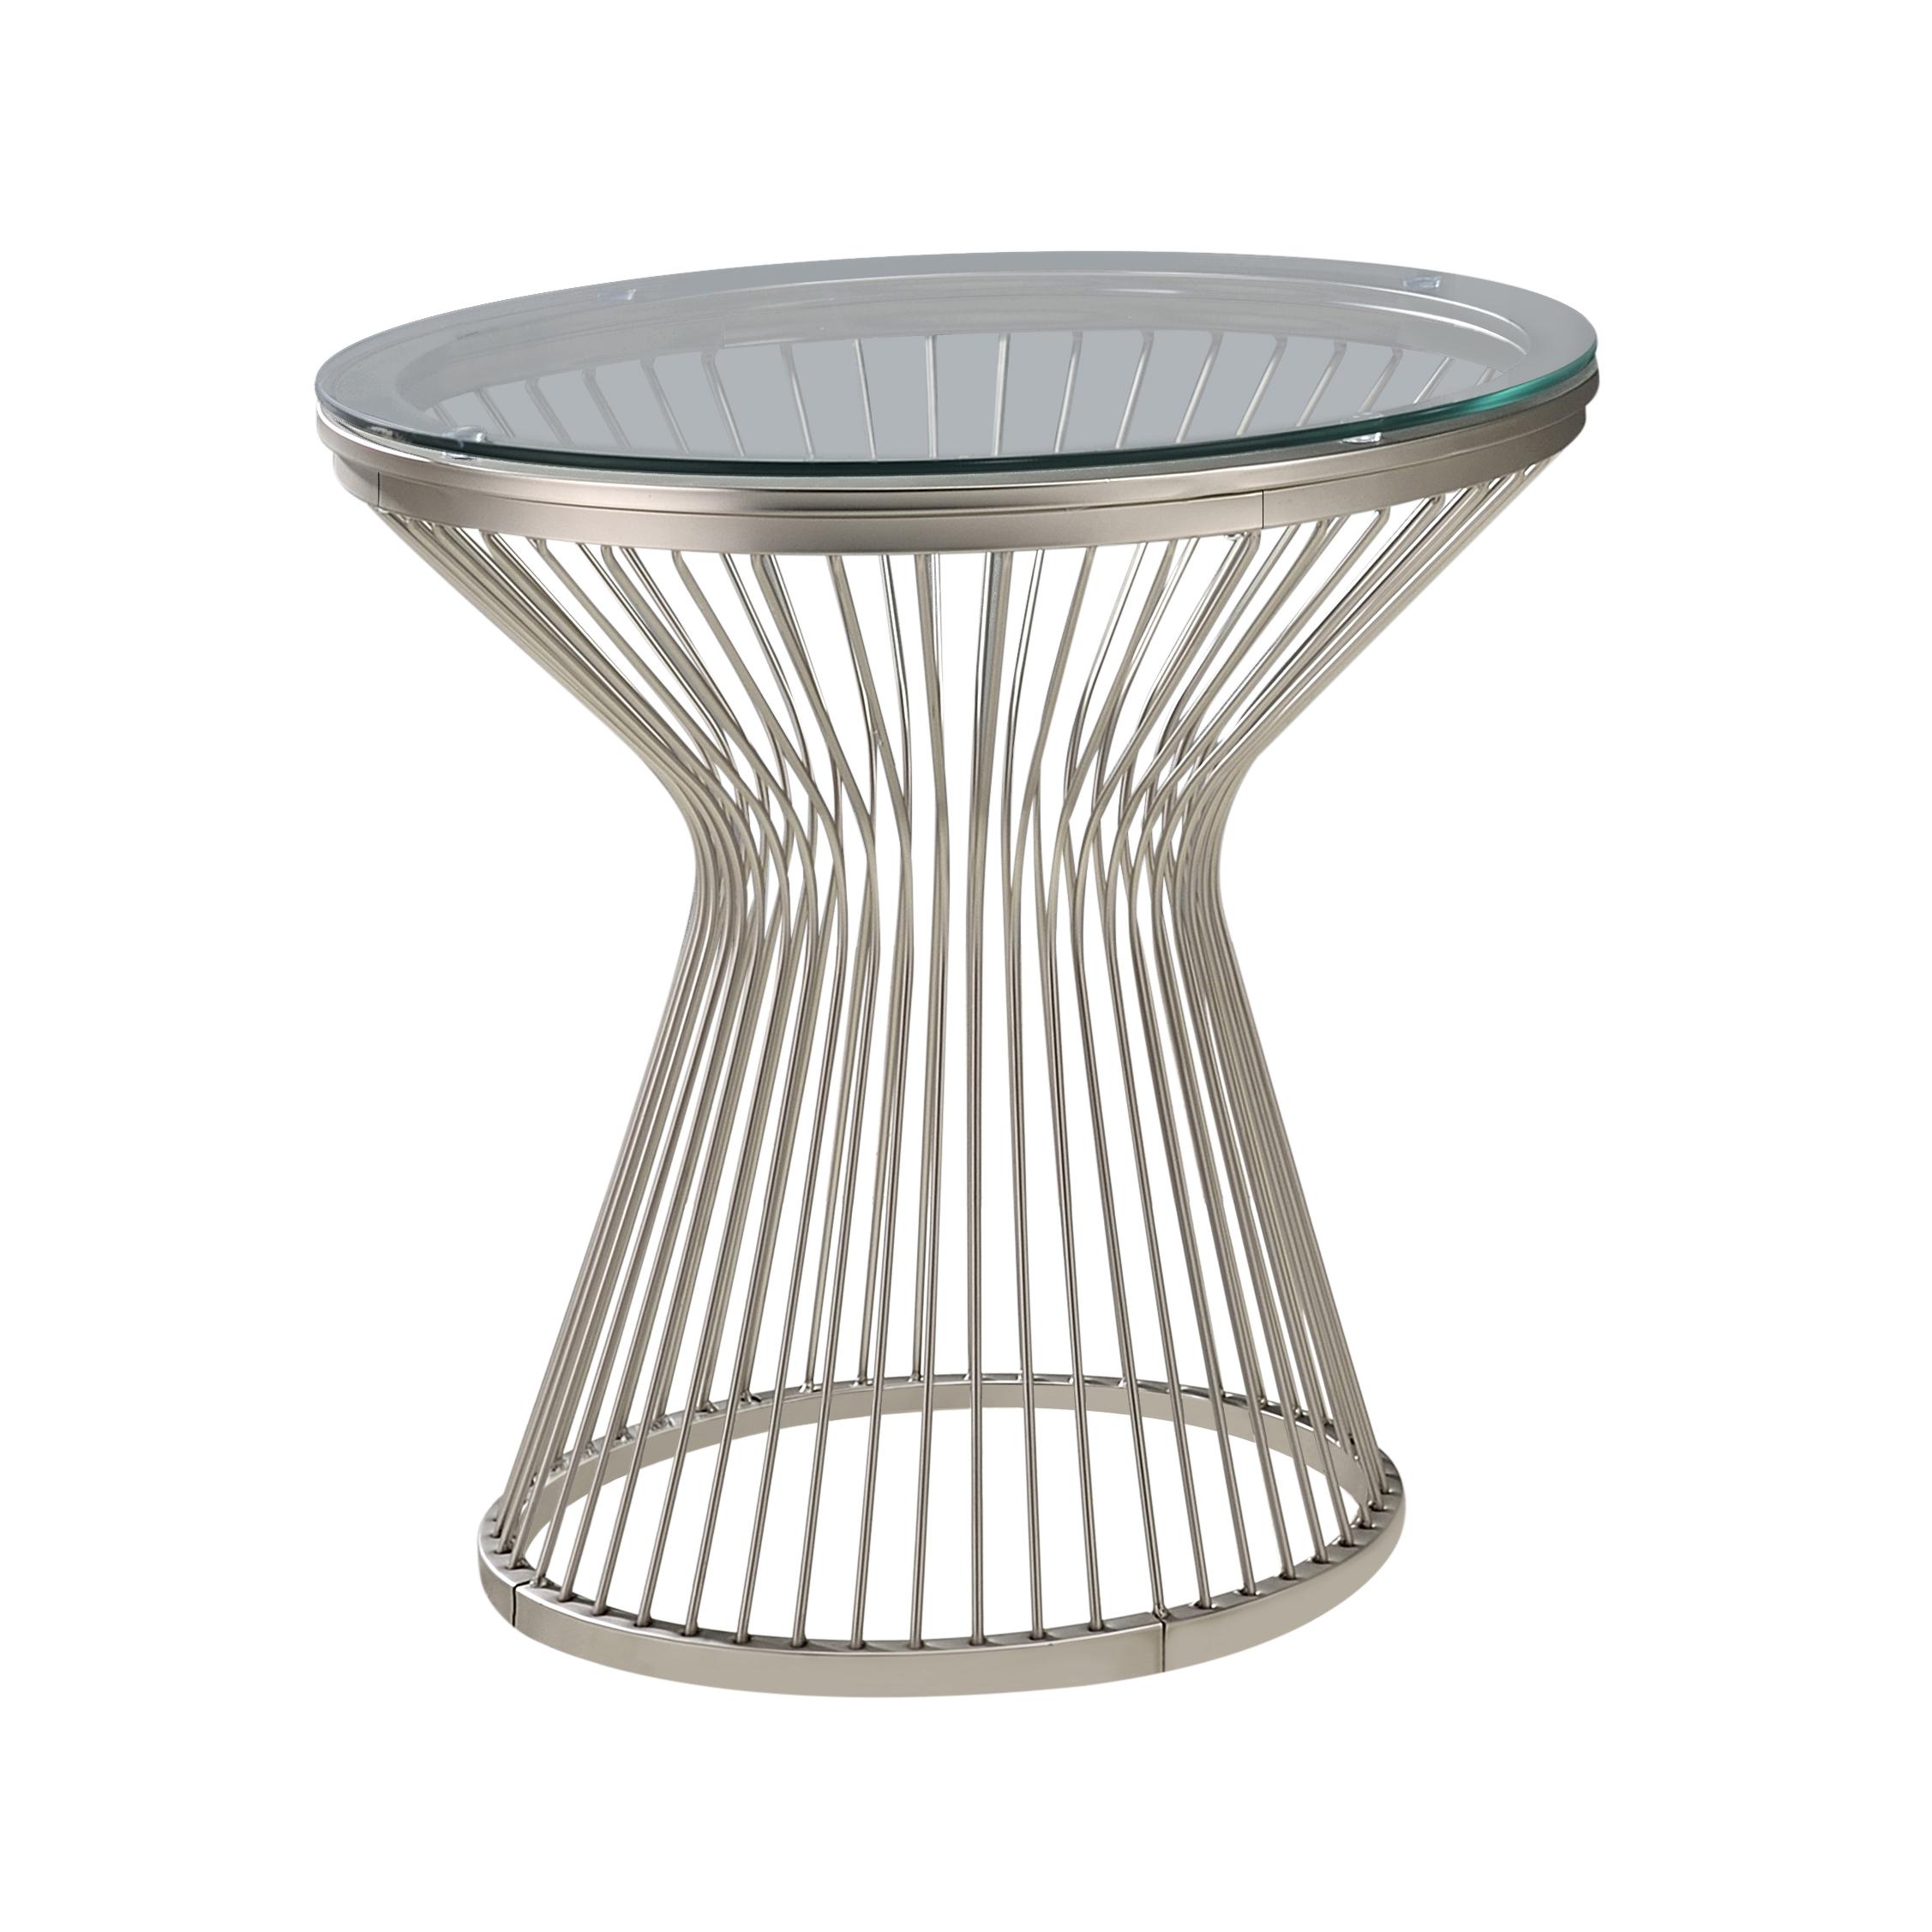 Modern End Table 724227 724227 in Gray 